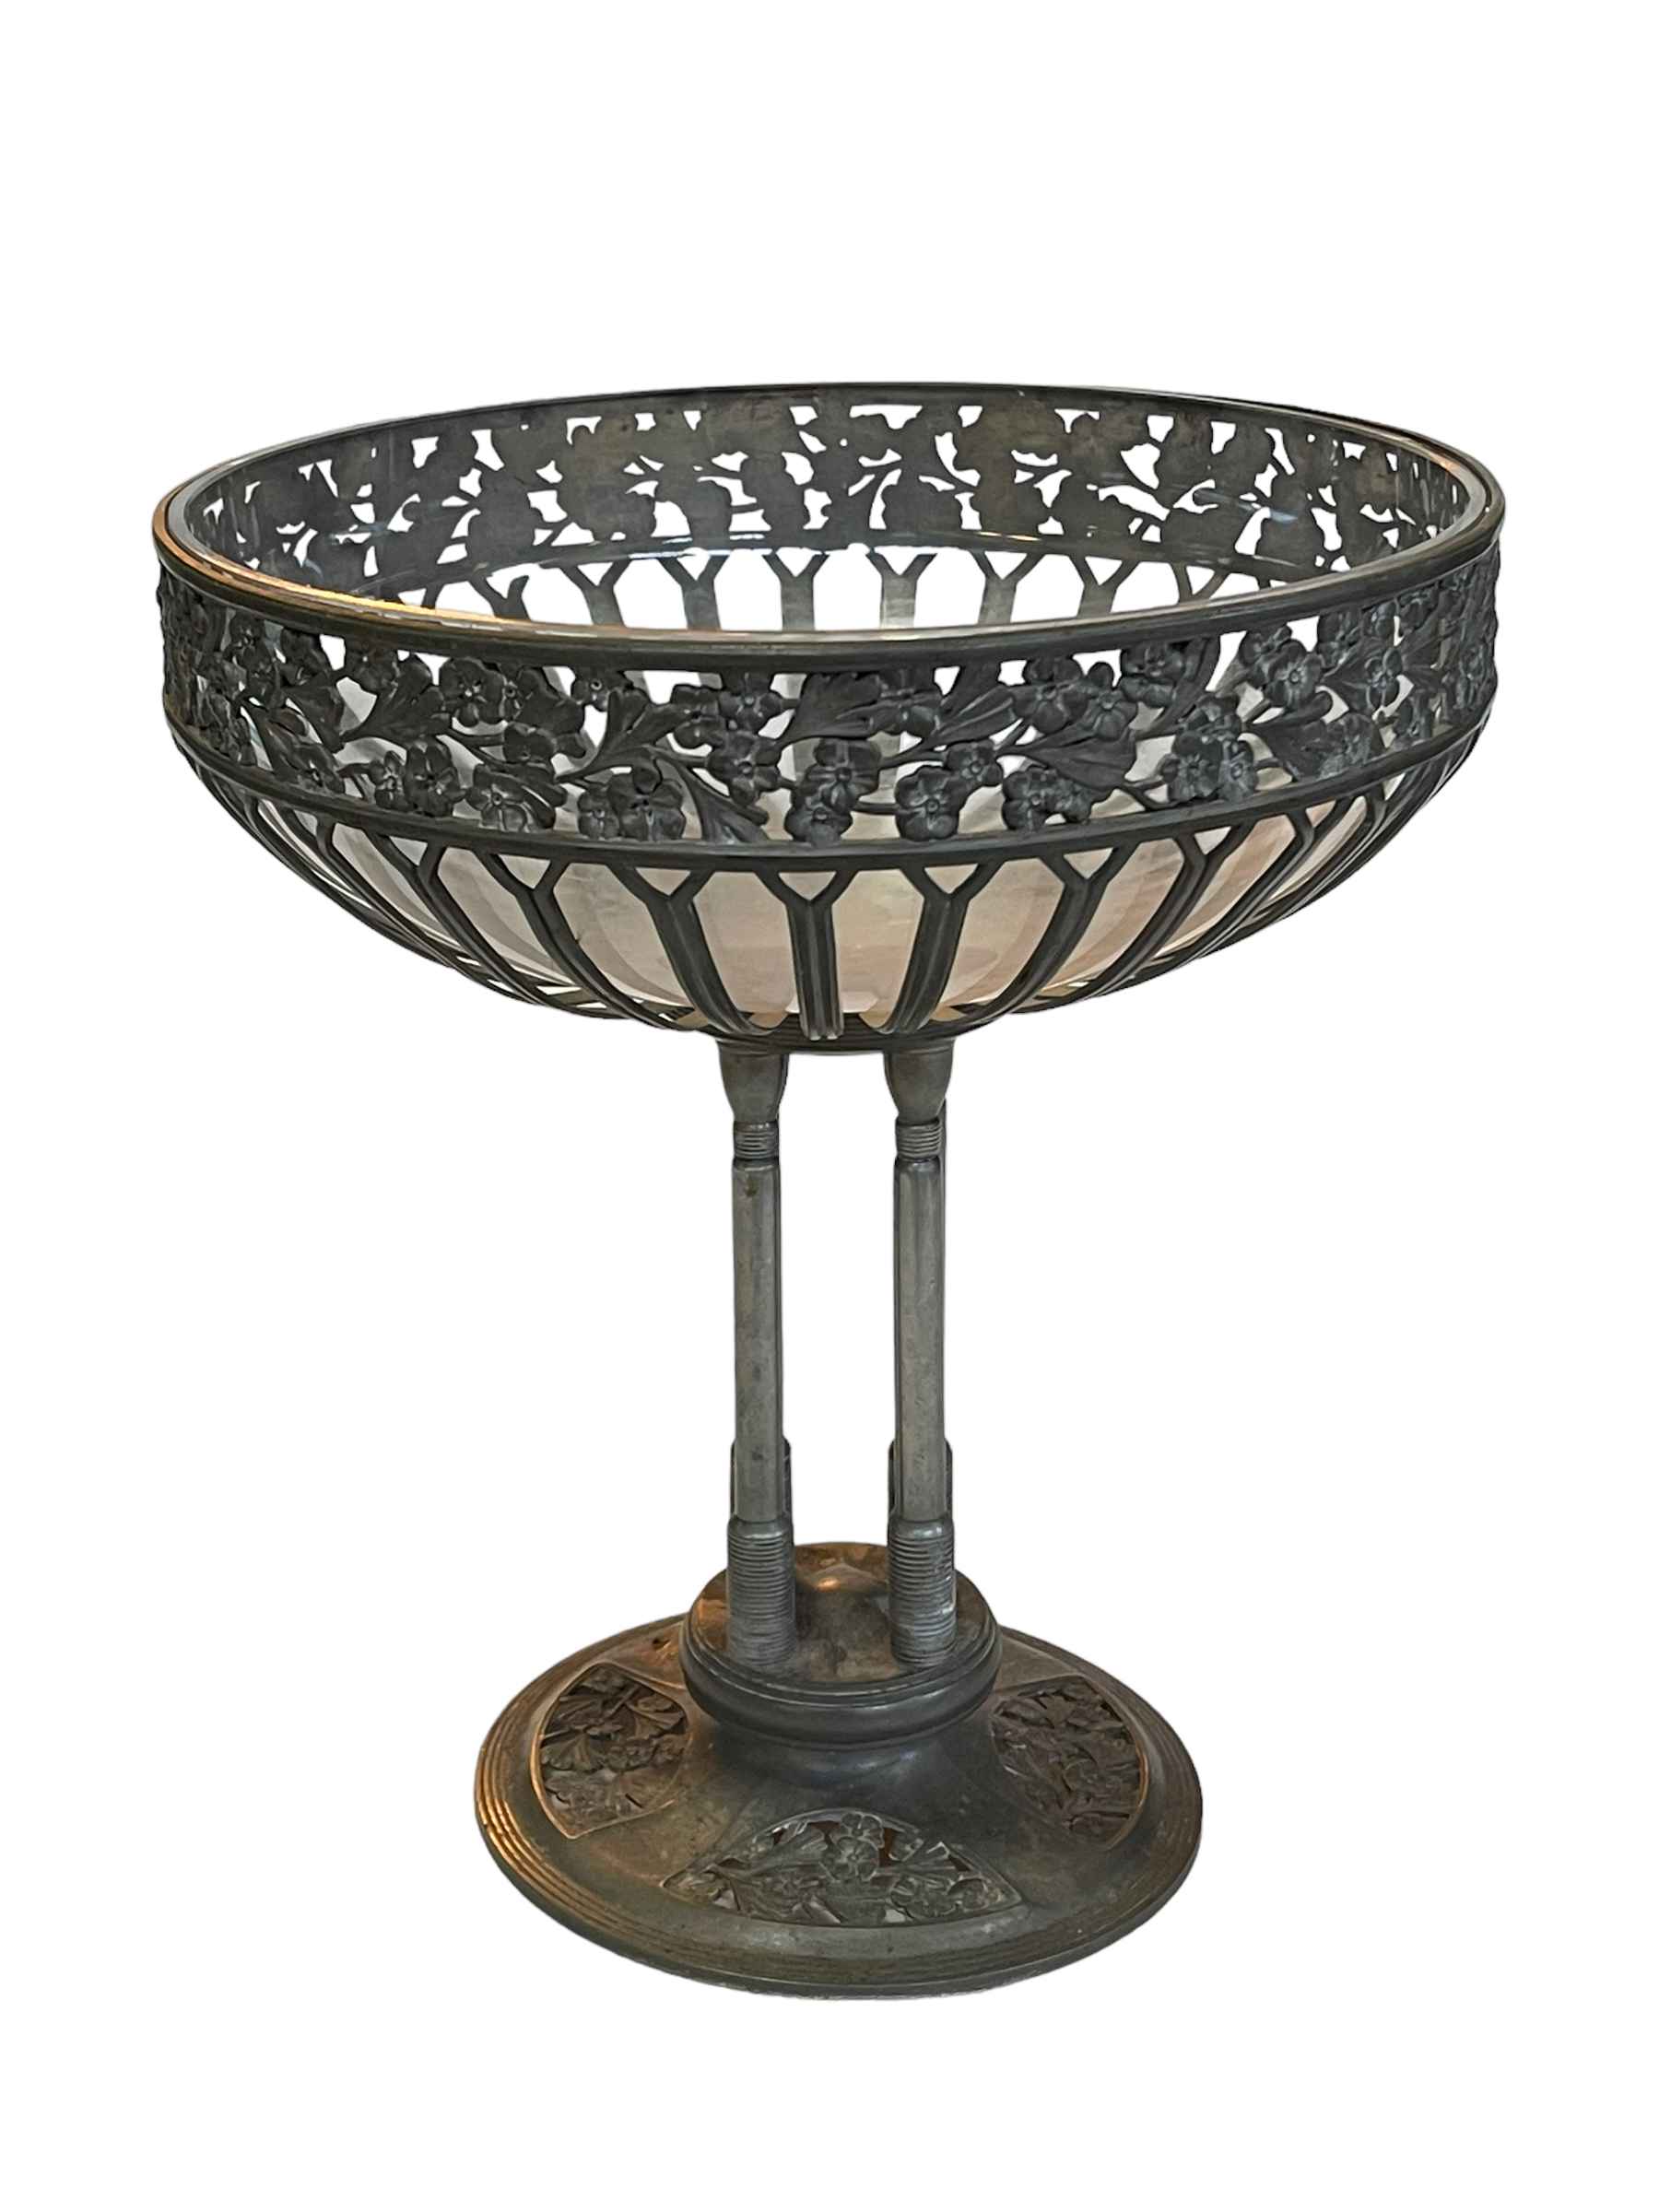 Ornate pewter and glass table centrepiece, 29cm.